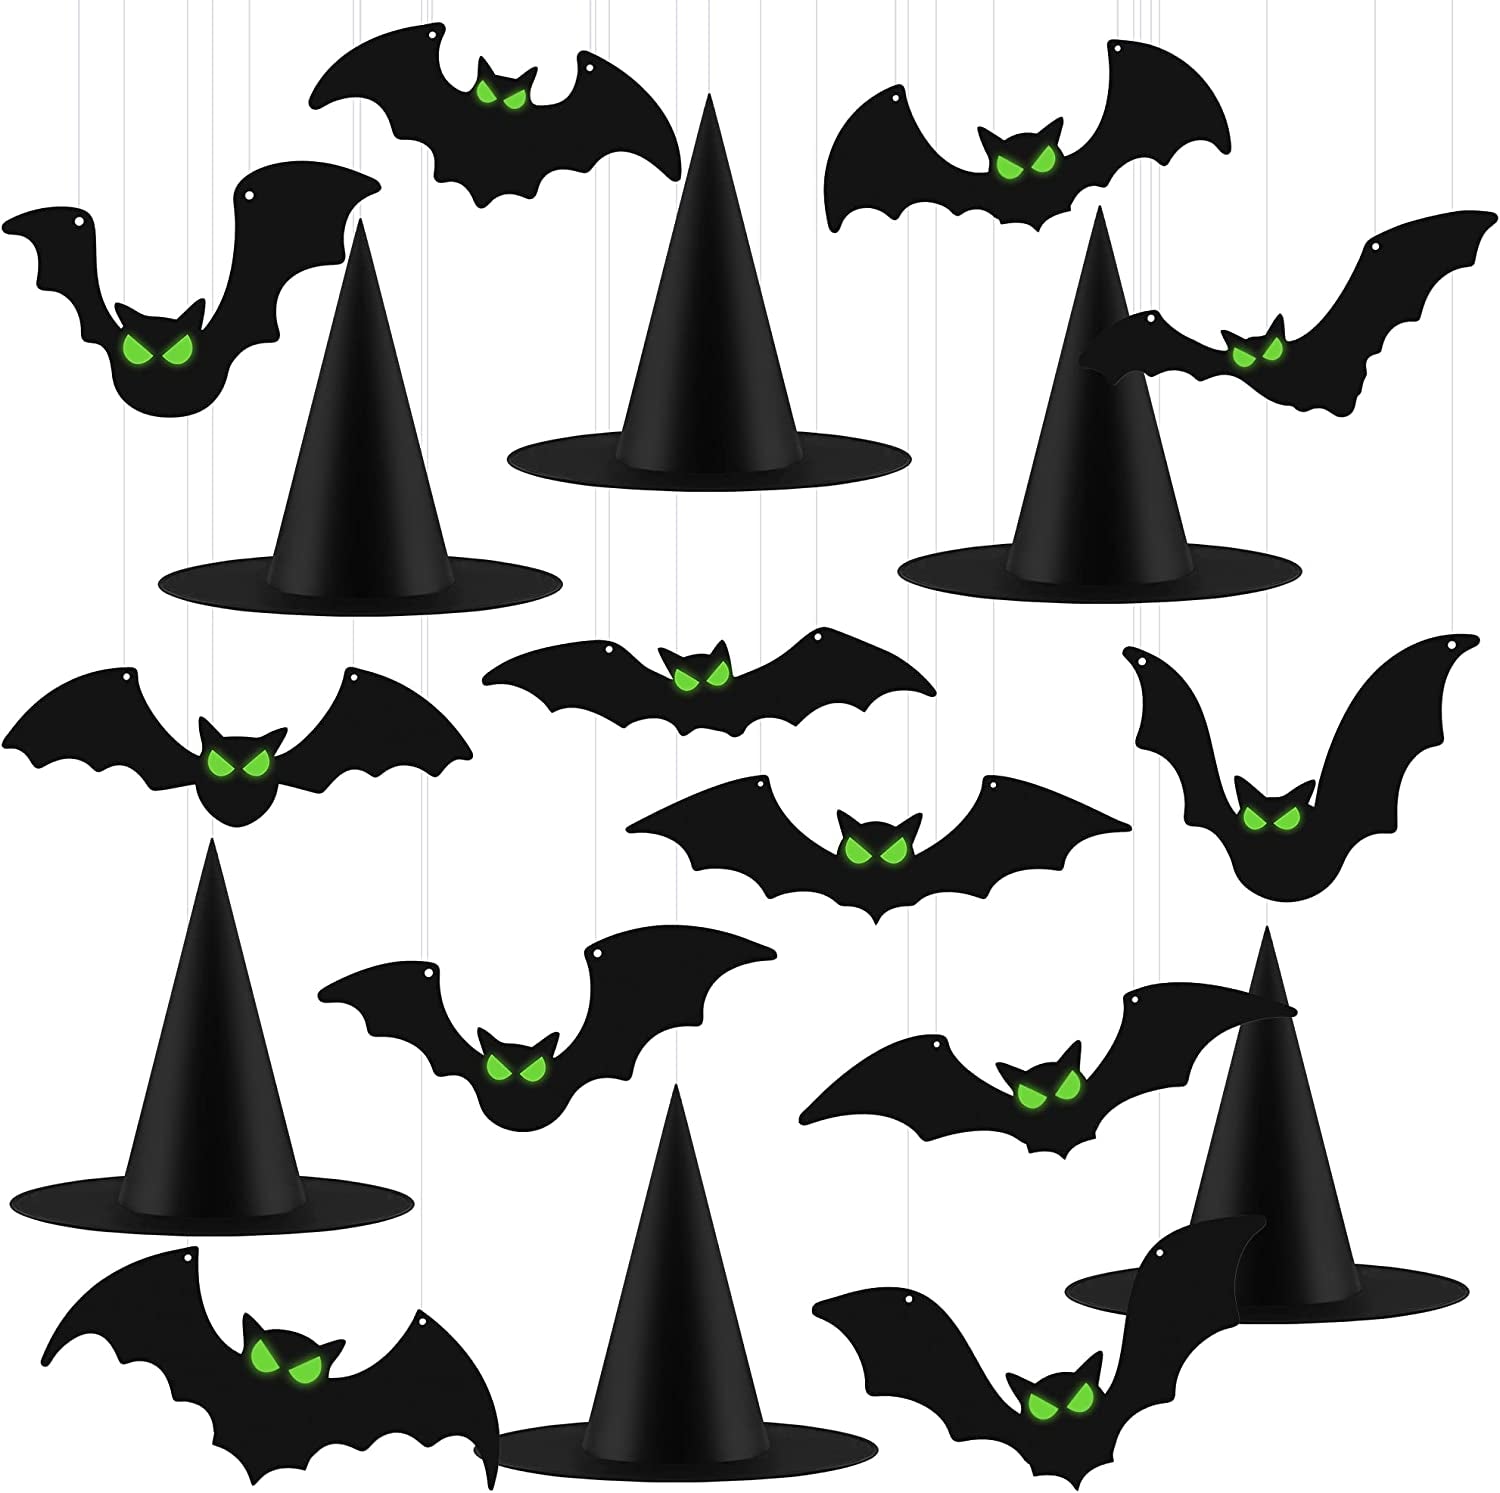 Fovths, Fovths 12 Pieces Halloween Hanging Decoration with Glow Eyes 6 Pack Halloween Black Witch Hat for Garden Yard Lawn Scary Halloween Witch Decor Outside